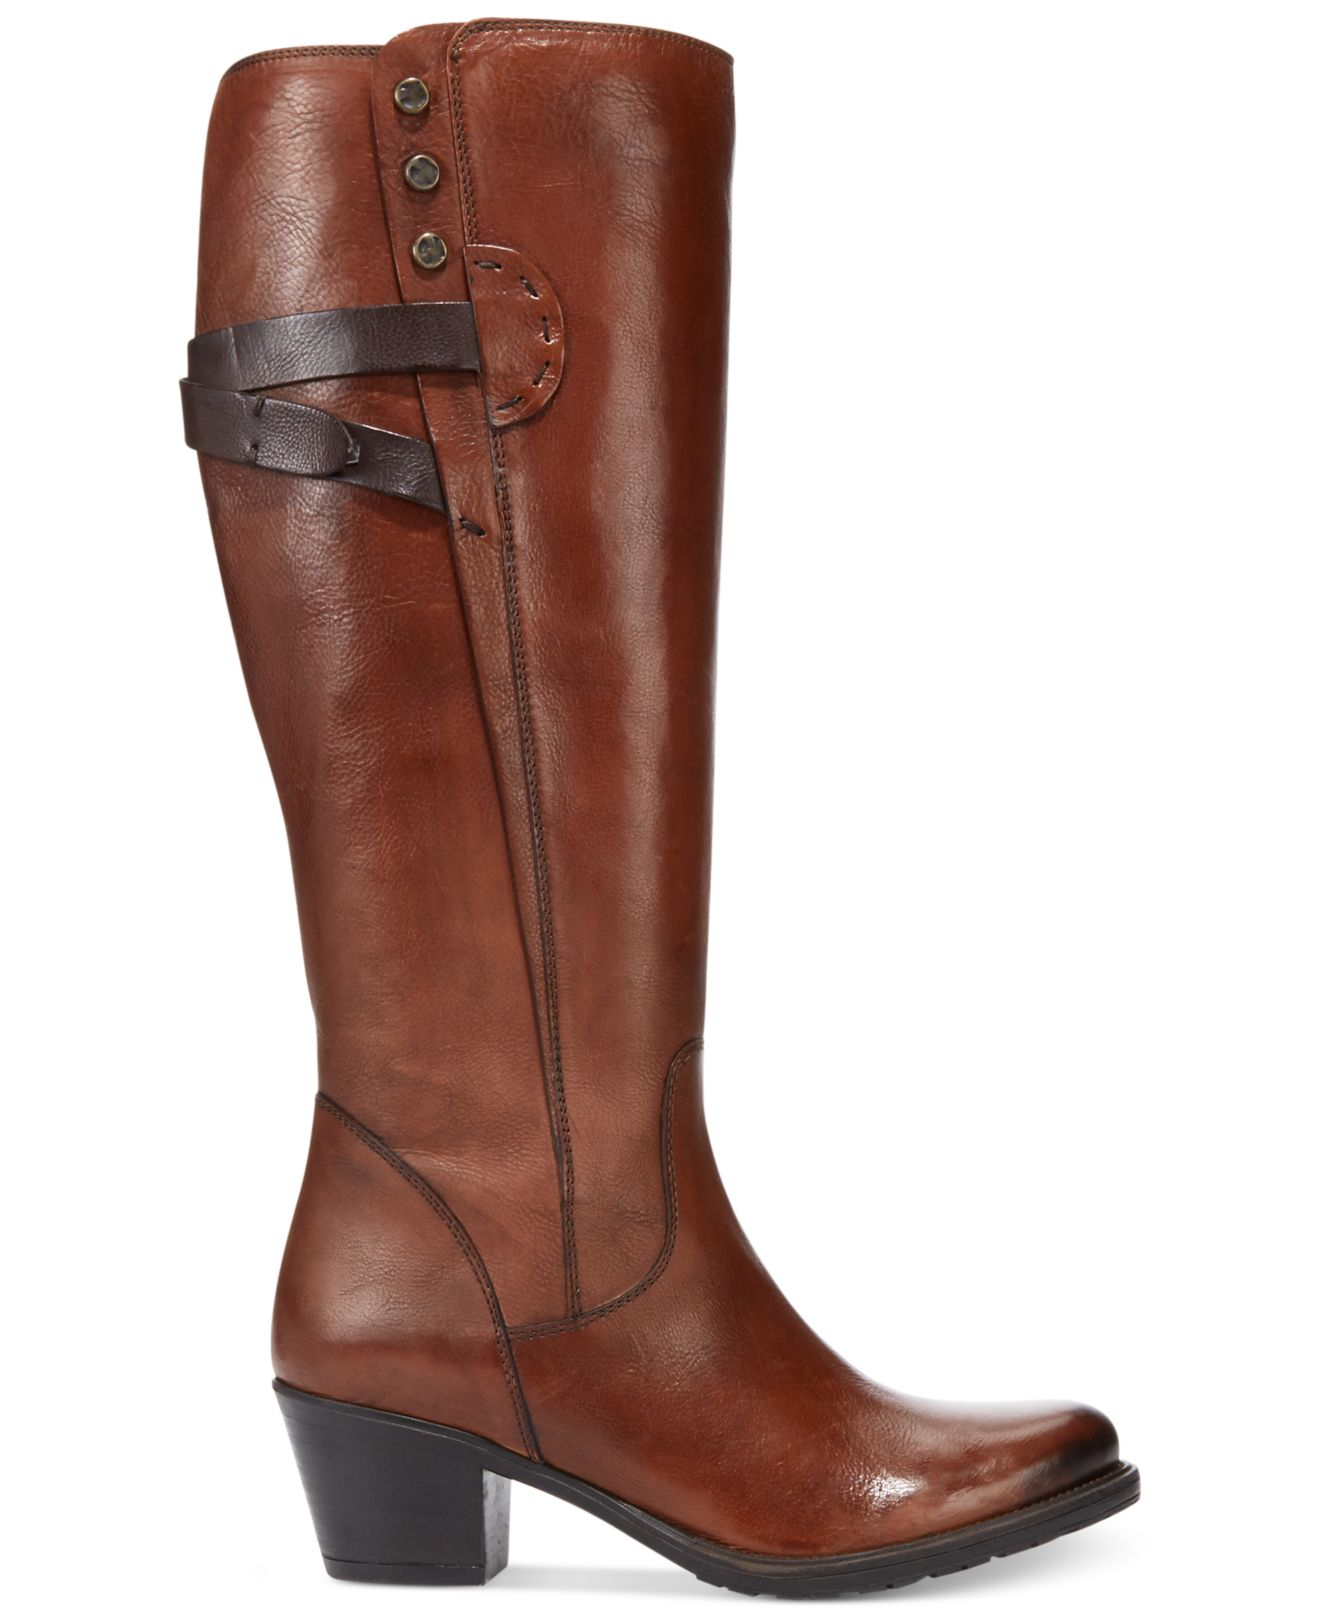 clarks tall brown boots off 57% - www 